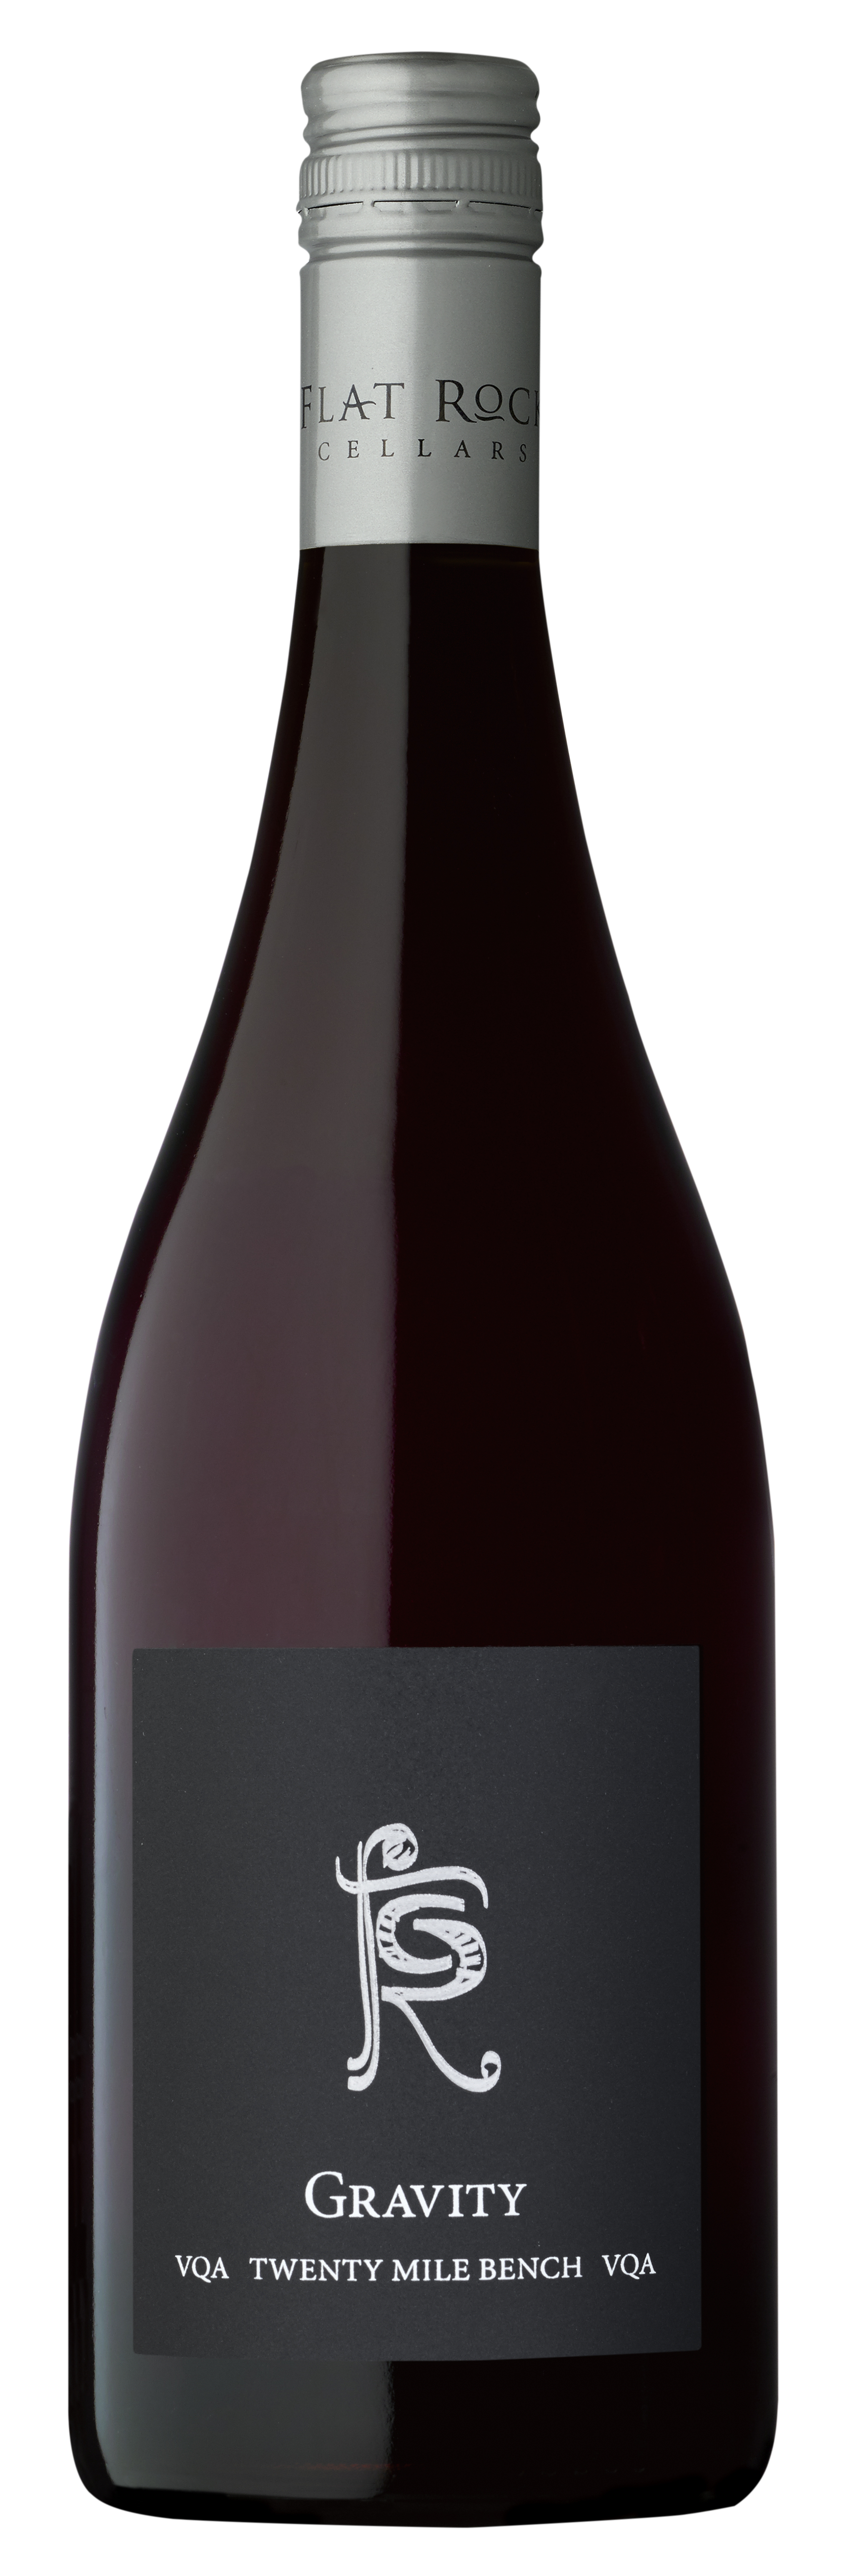 Product Image for 2019 Gravity Pinot Noir